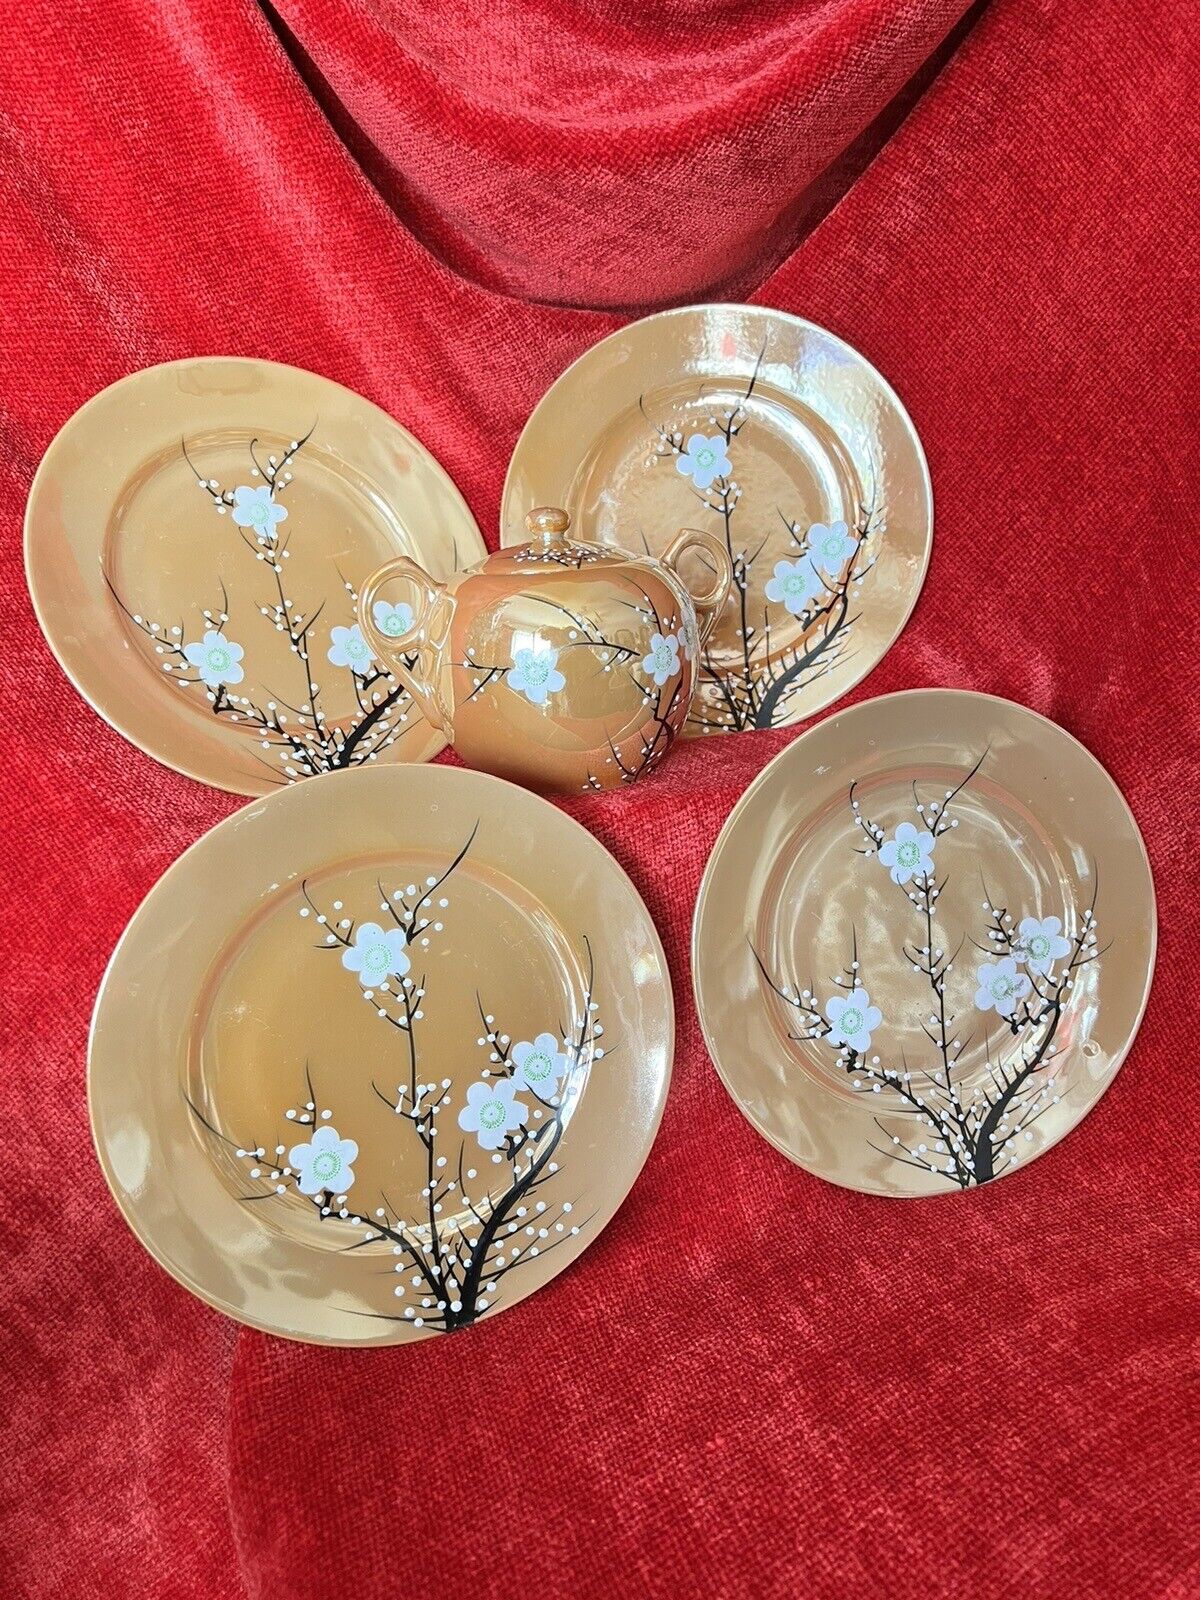 VTG 4 LUSTERWARE Luncheon Plates & Sugar bowl Hand-painted Japan Cherry Blossoms